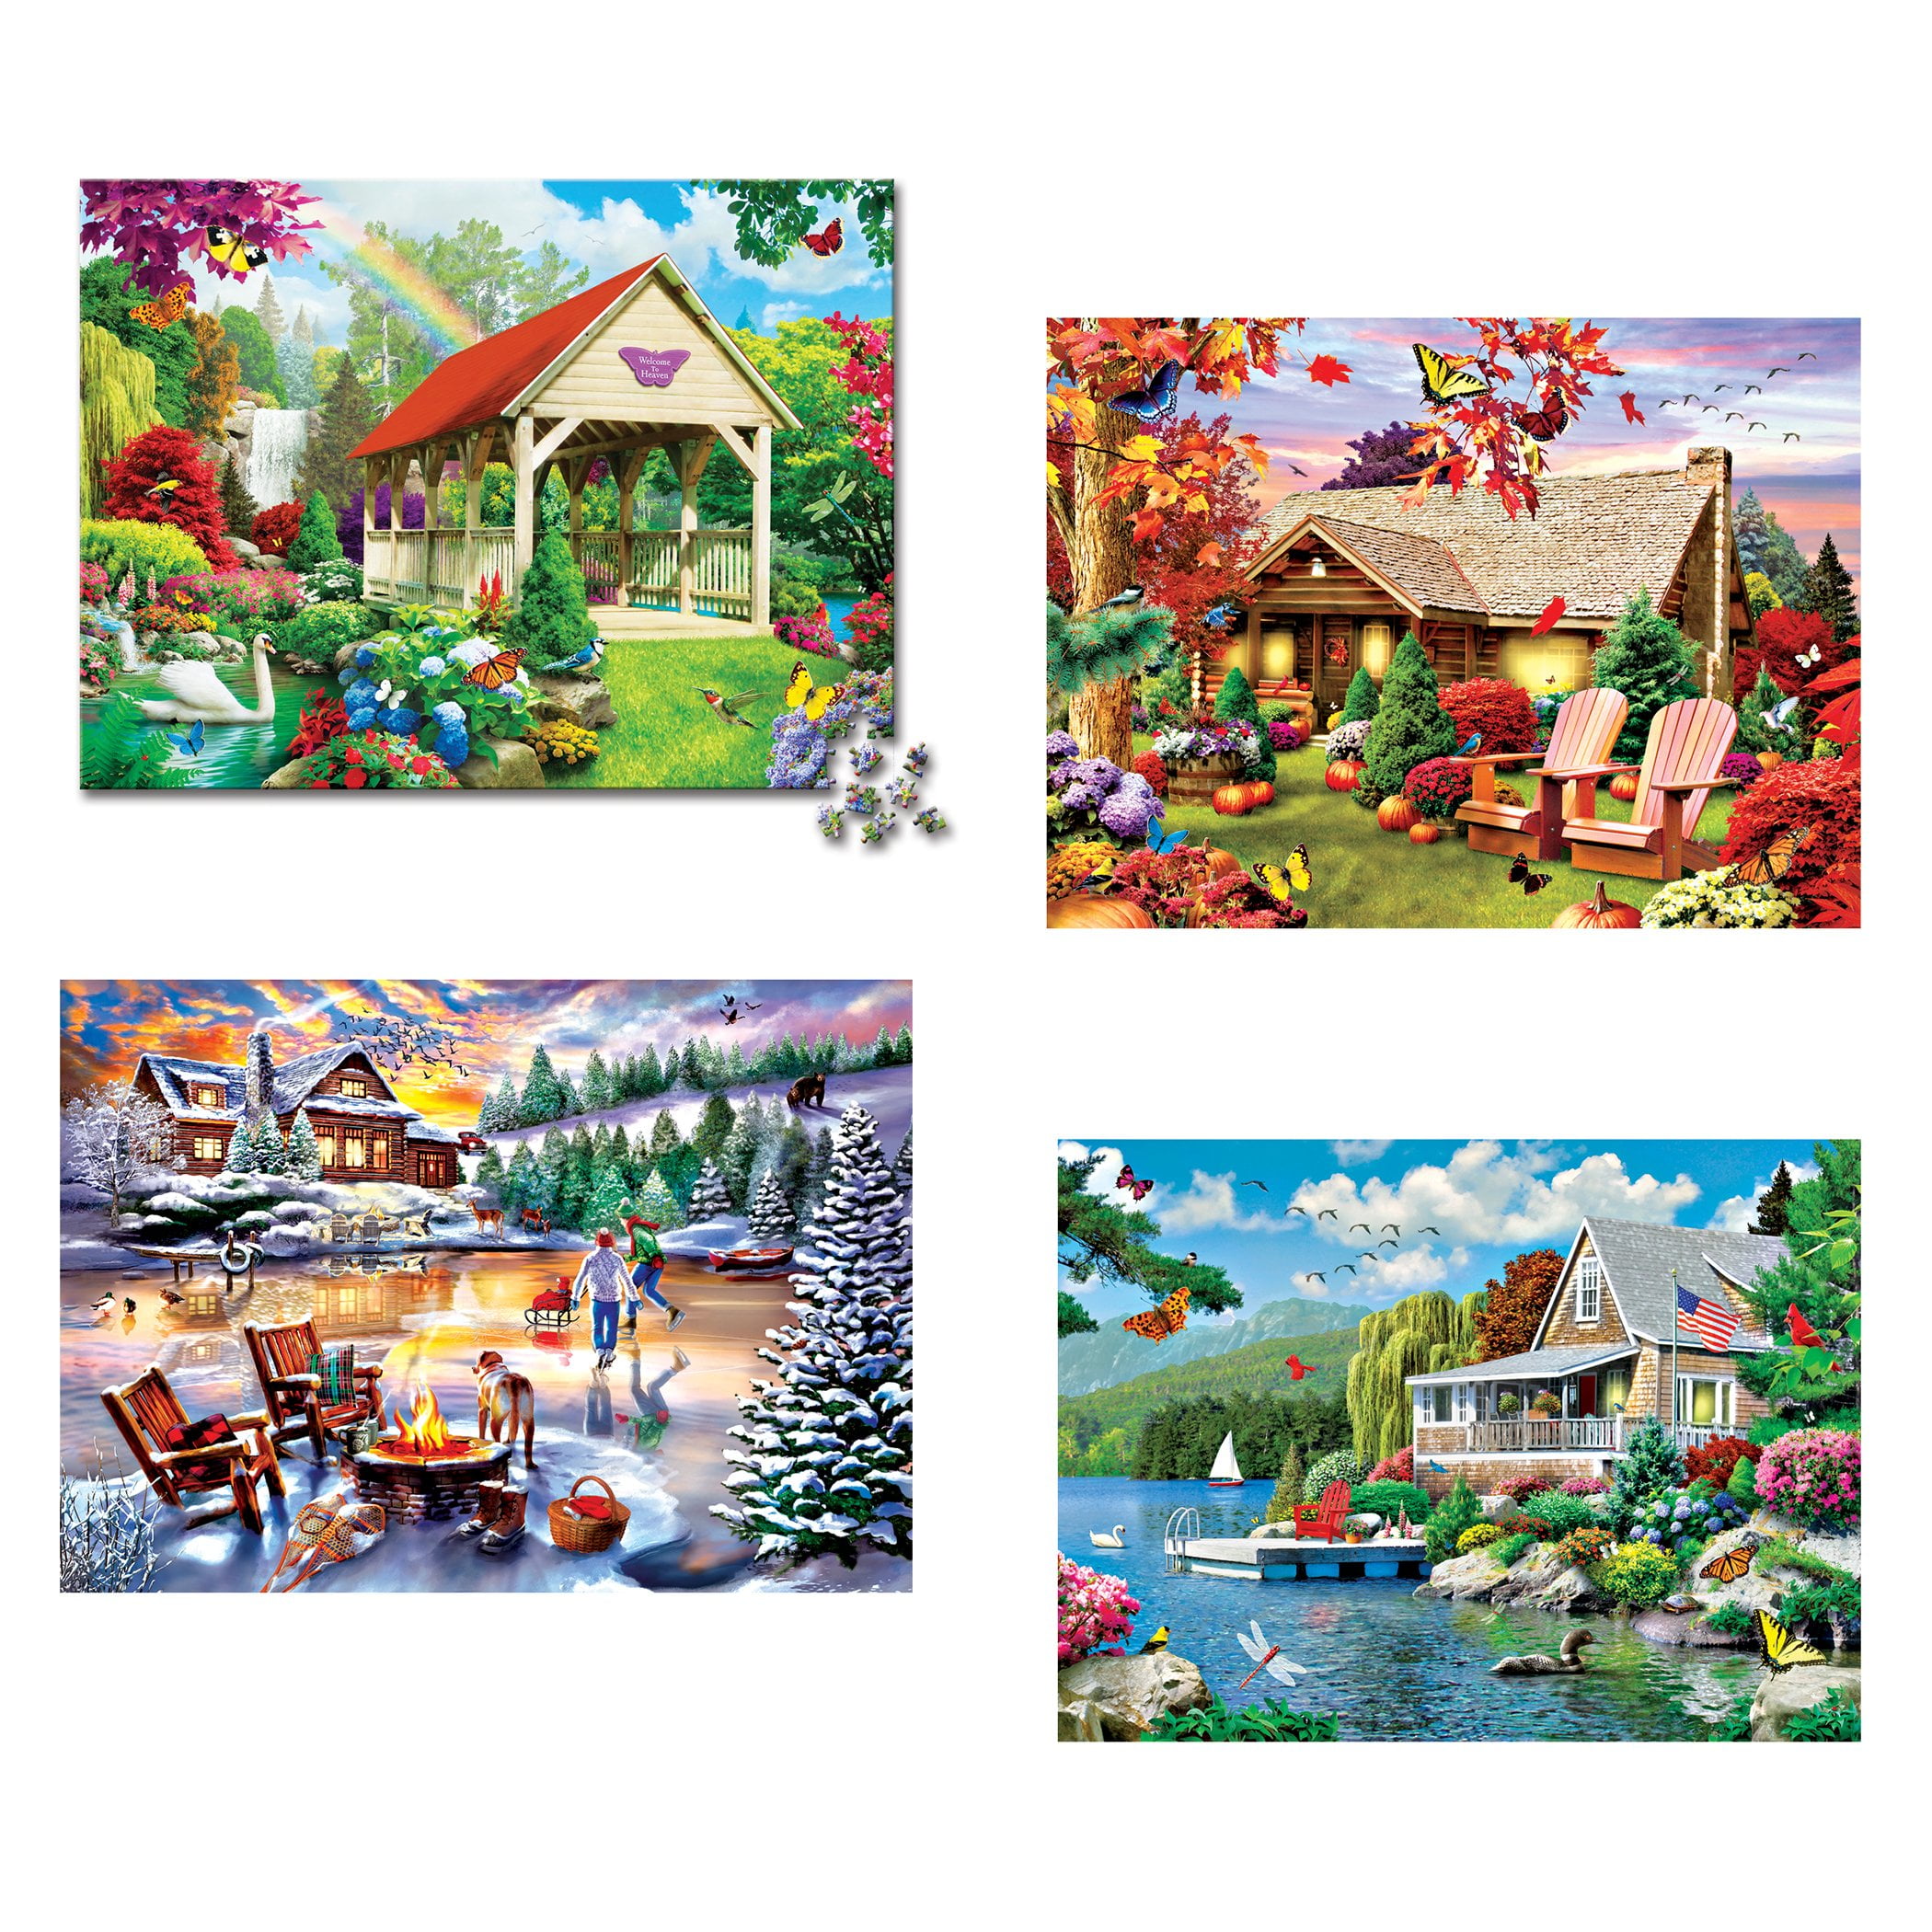 Jigsaw Puzzle Landscape Duck Season Great Outdoors Series 500 pieces NEW 